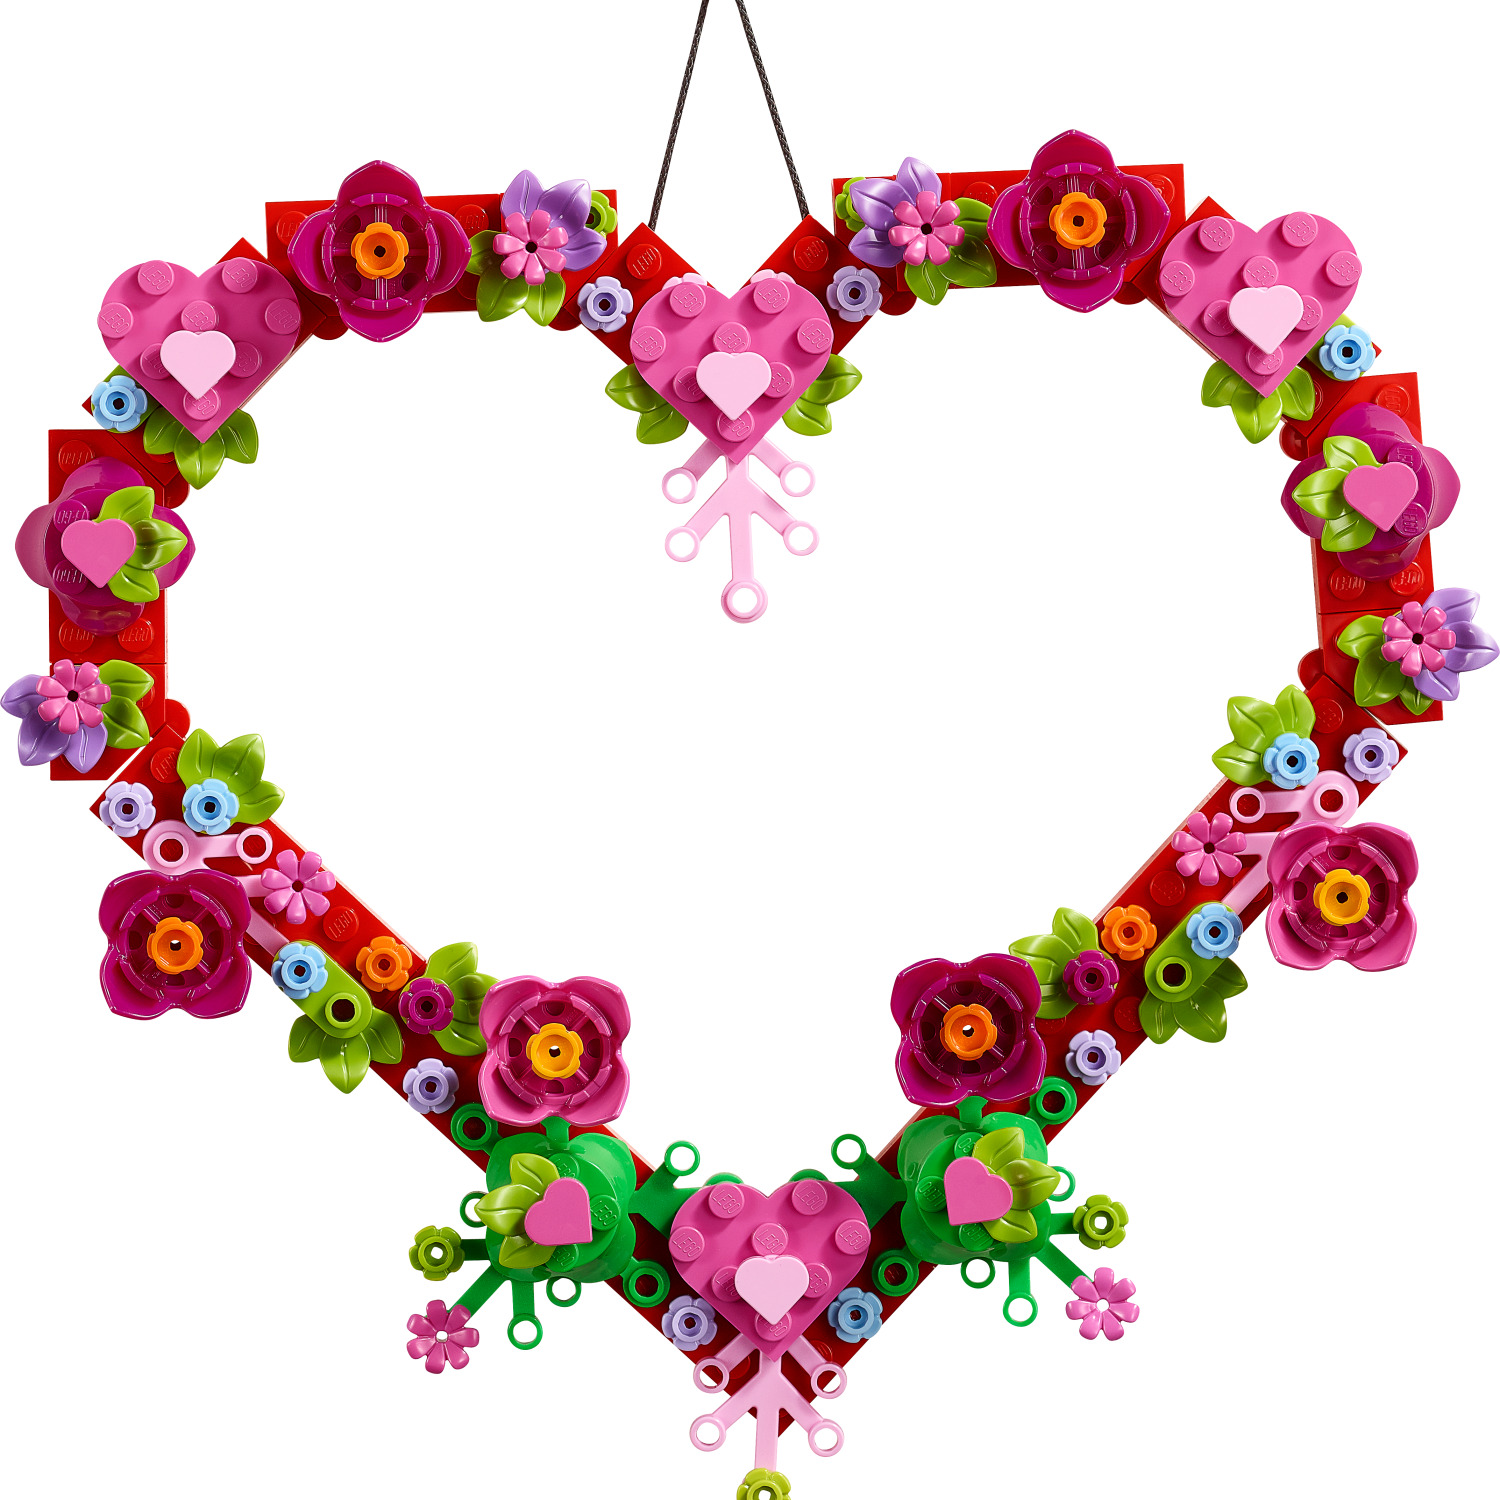 LEGO® LEL Seasons and Occasions: Heart Ornament